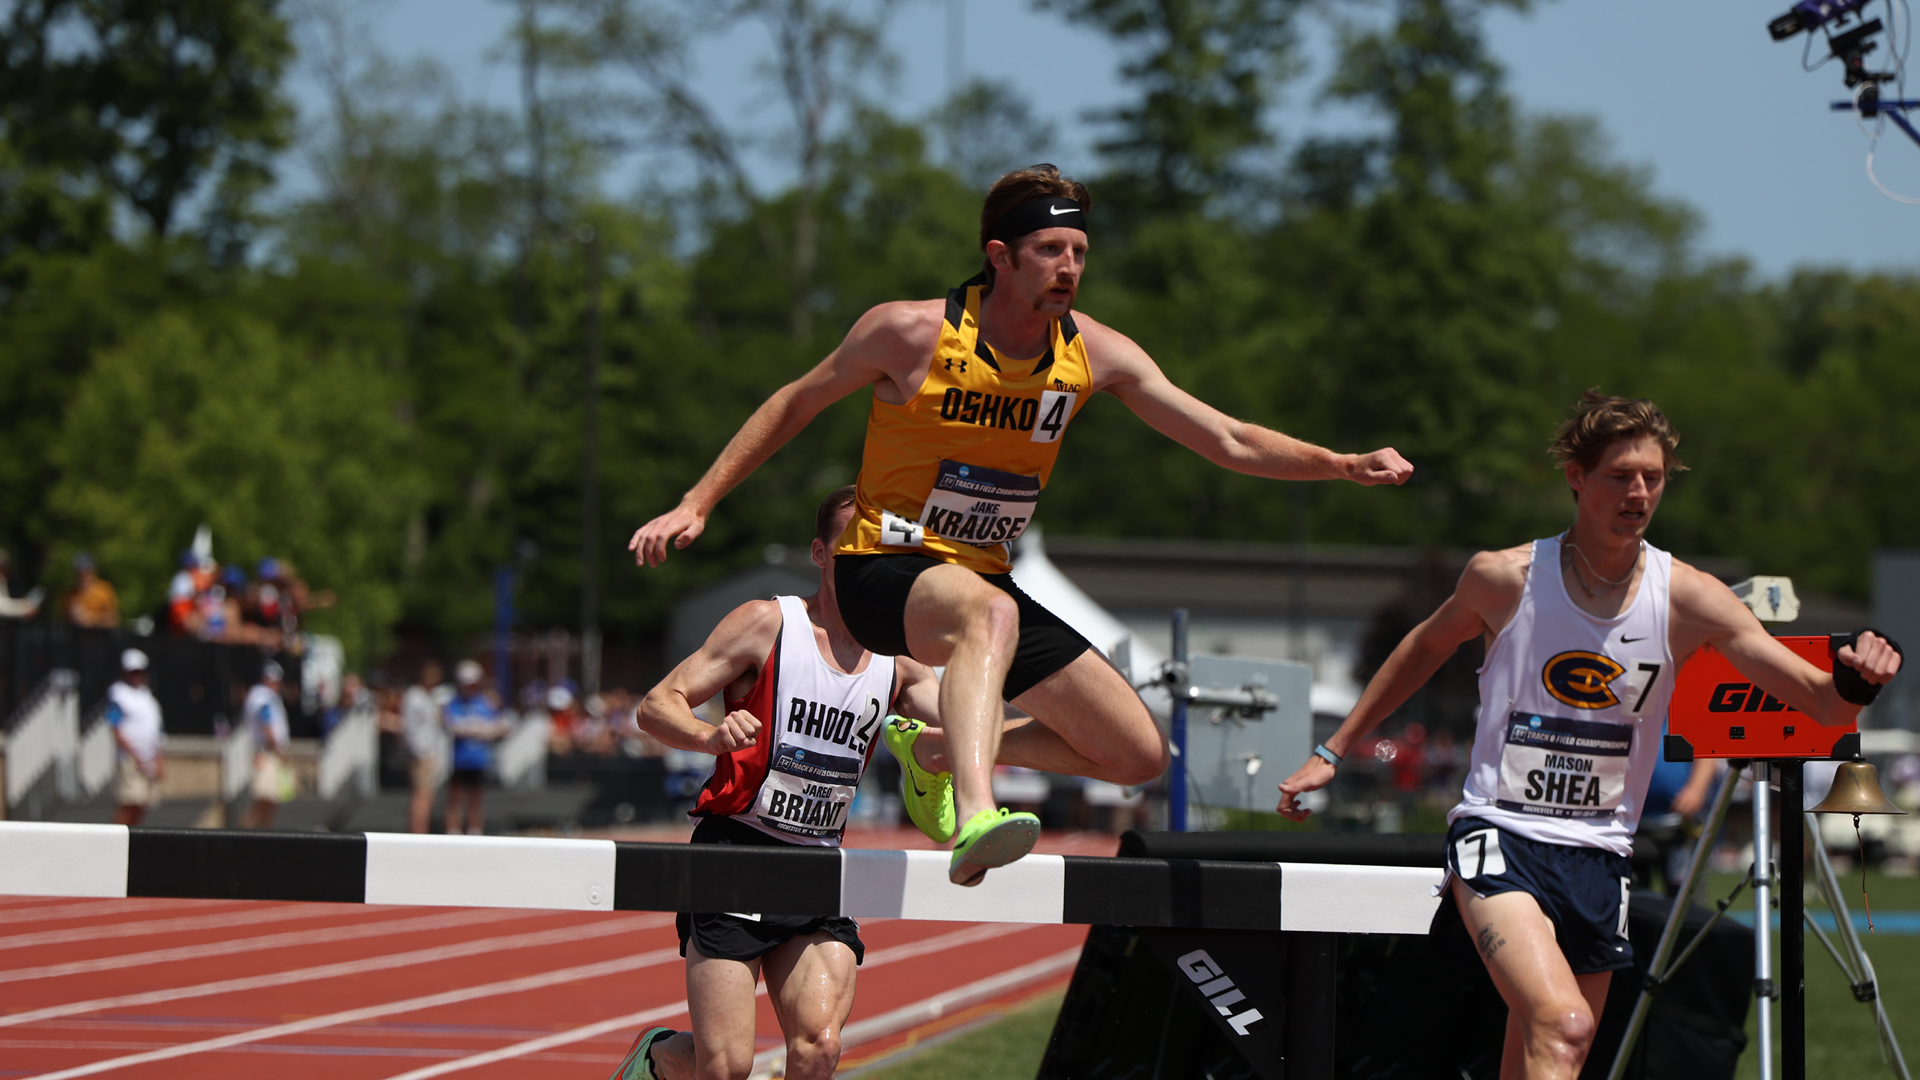 Jake Krause running in the 3,000-meter steeplechase at the 2023 NCAA Outdoor Championship Photo Credit: D3photgraphy